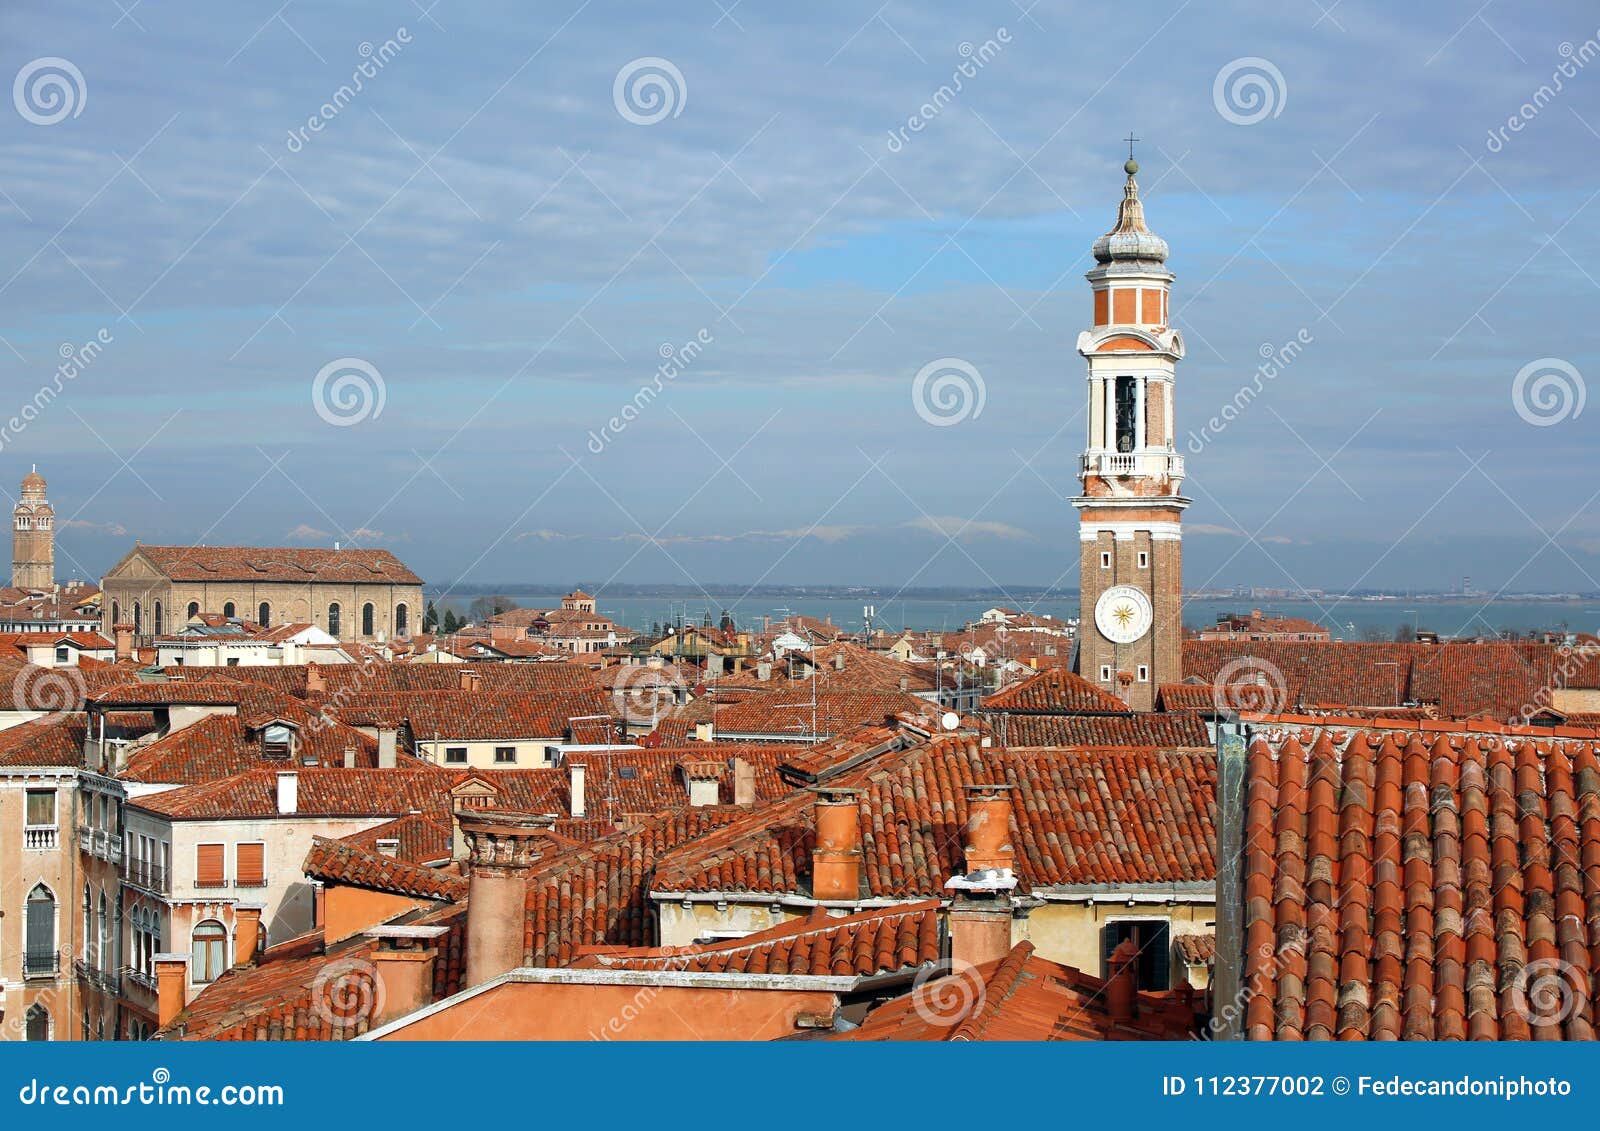 bell tower of church of the holy apostles of christ and many house in the cannaregio sestiere of venice in italy